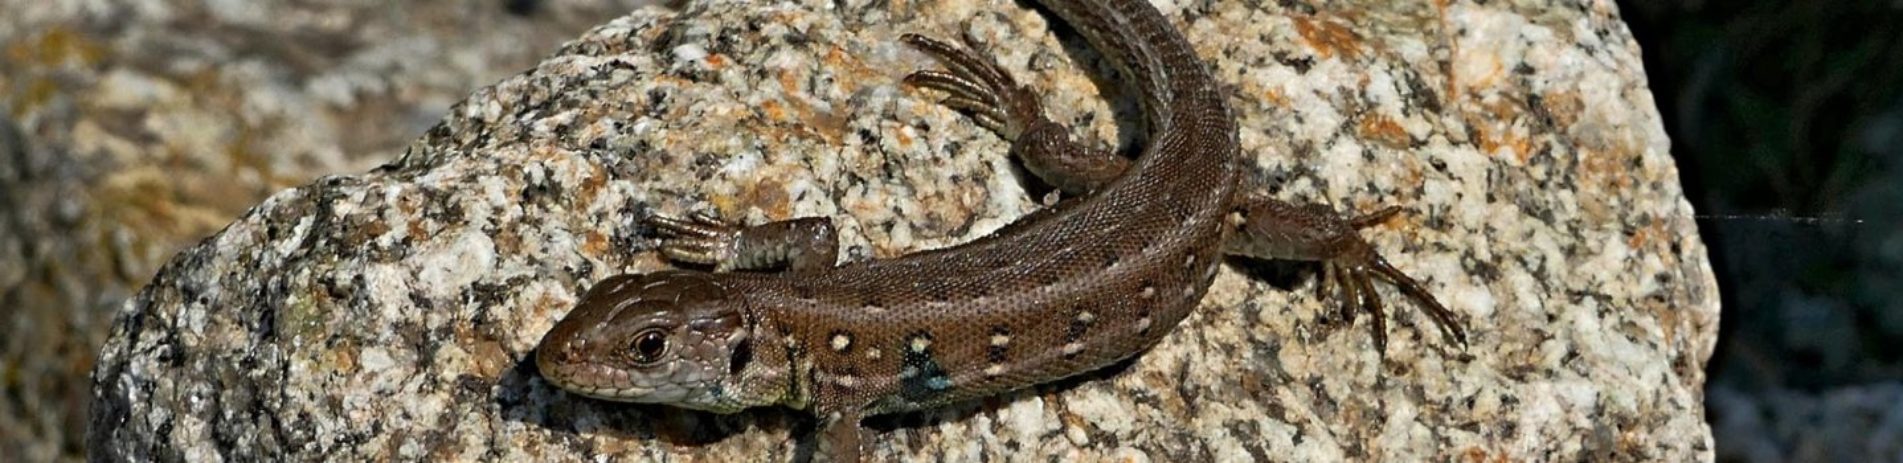 brown-speckled-lizard-with-long-tail-on-stone